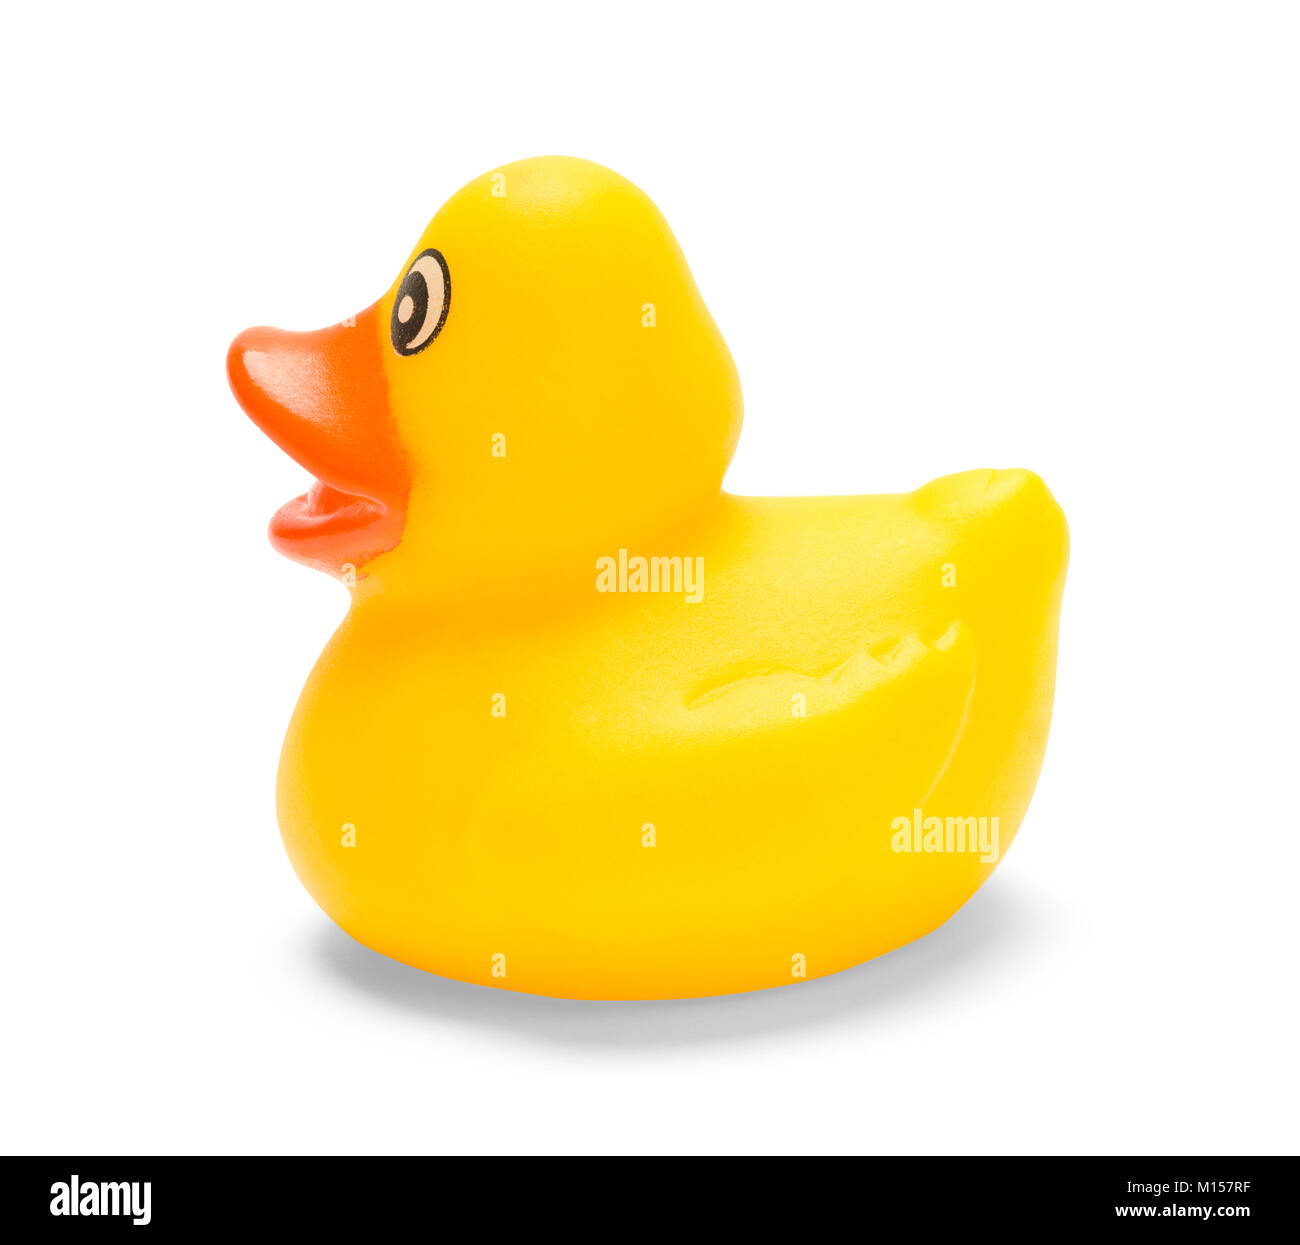 Small Yellow Rubber Duck Isolated on a White Background. Stock Photo